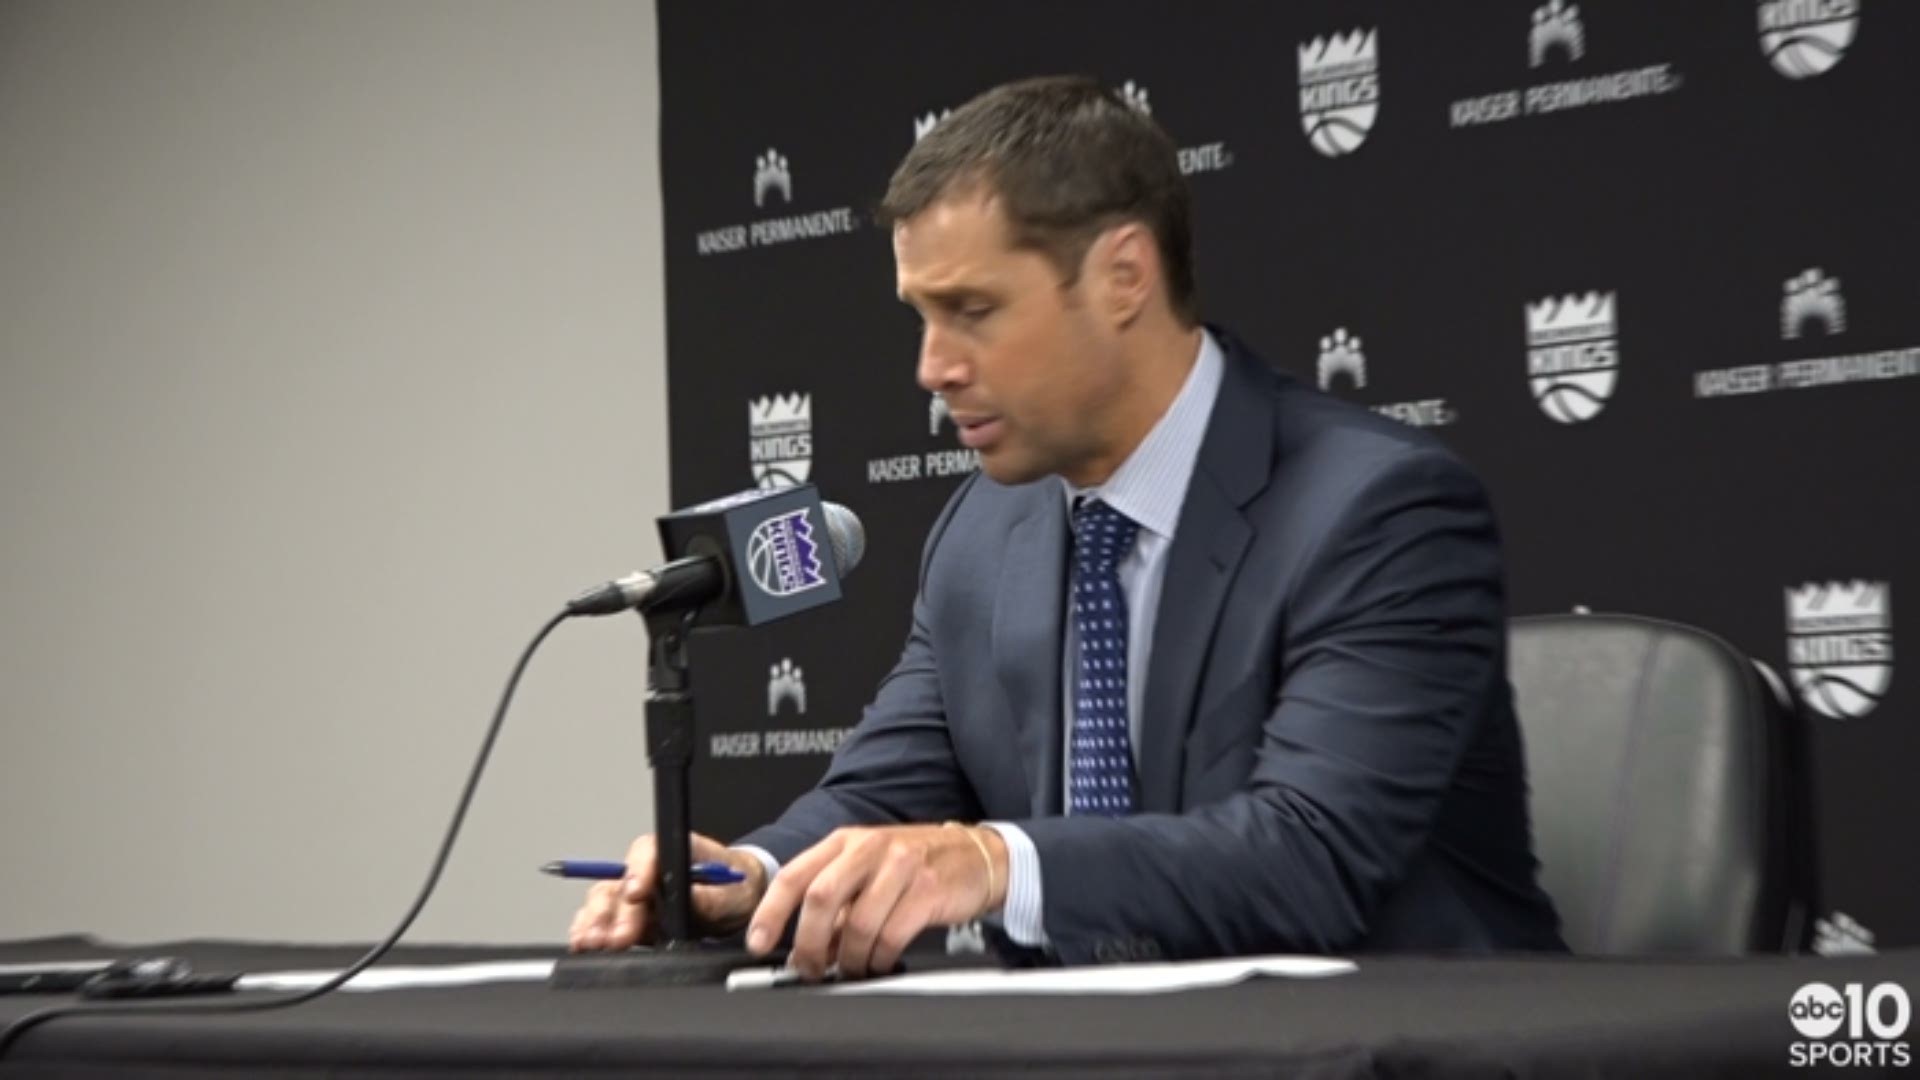 Kings head coach Dave Joerger discusses the team's win over the Minnesota Timberwolves, them setting a franchise record with 19 made three's and the play of Yogi Ferrell.